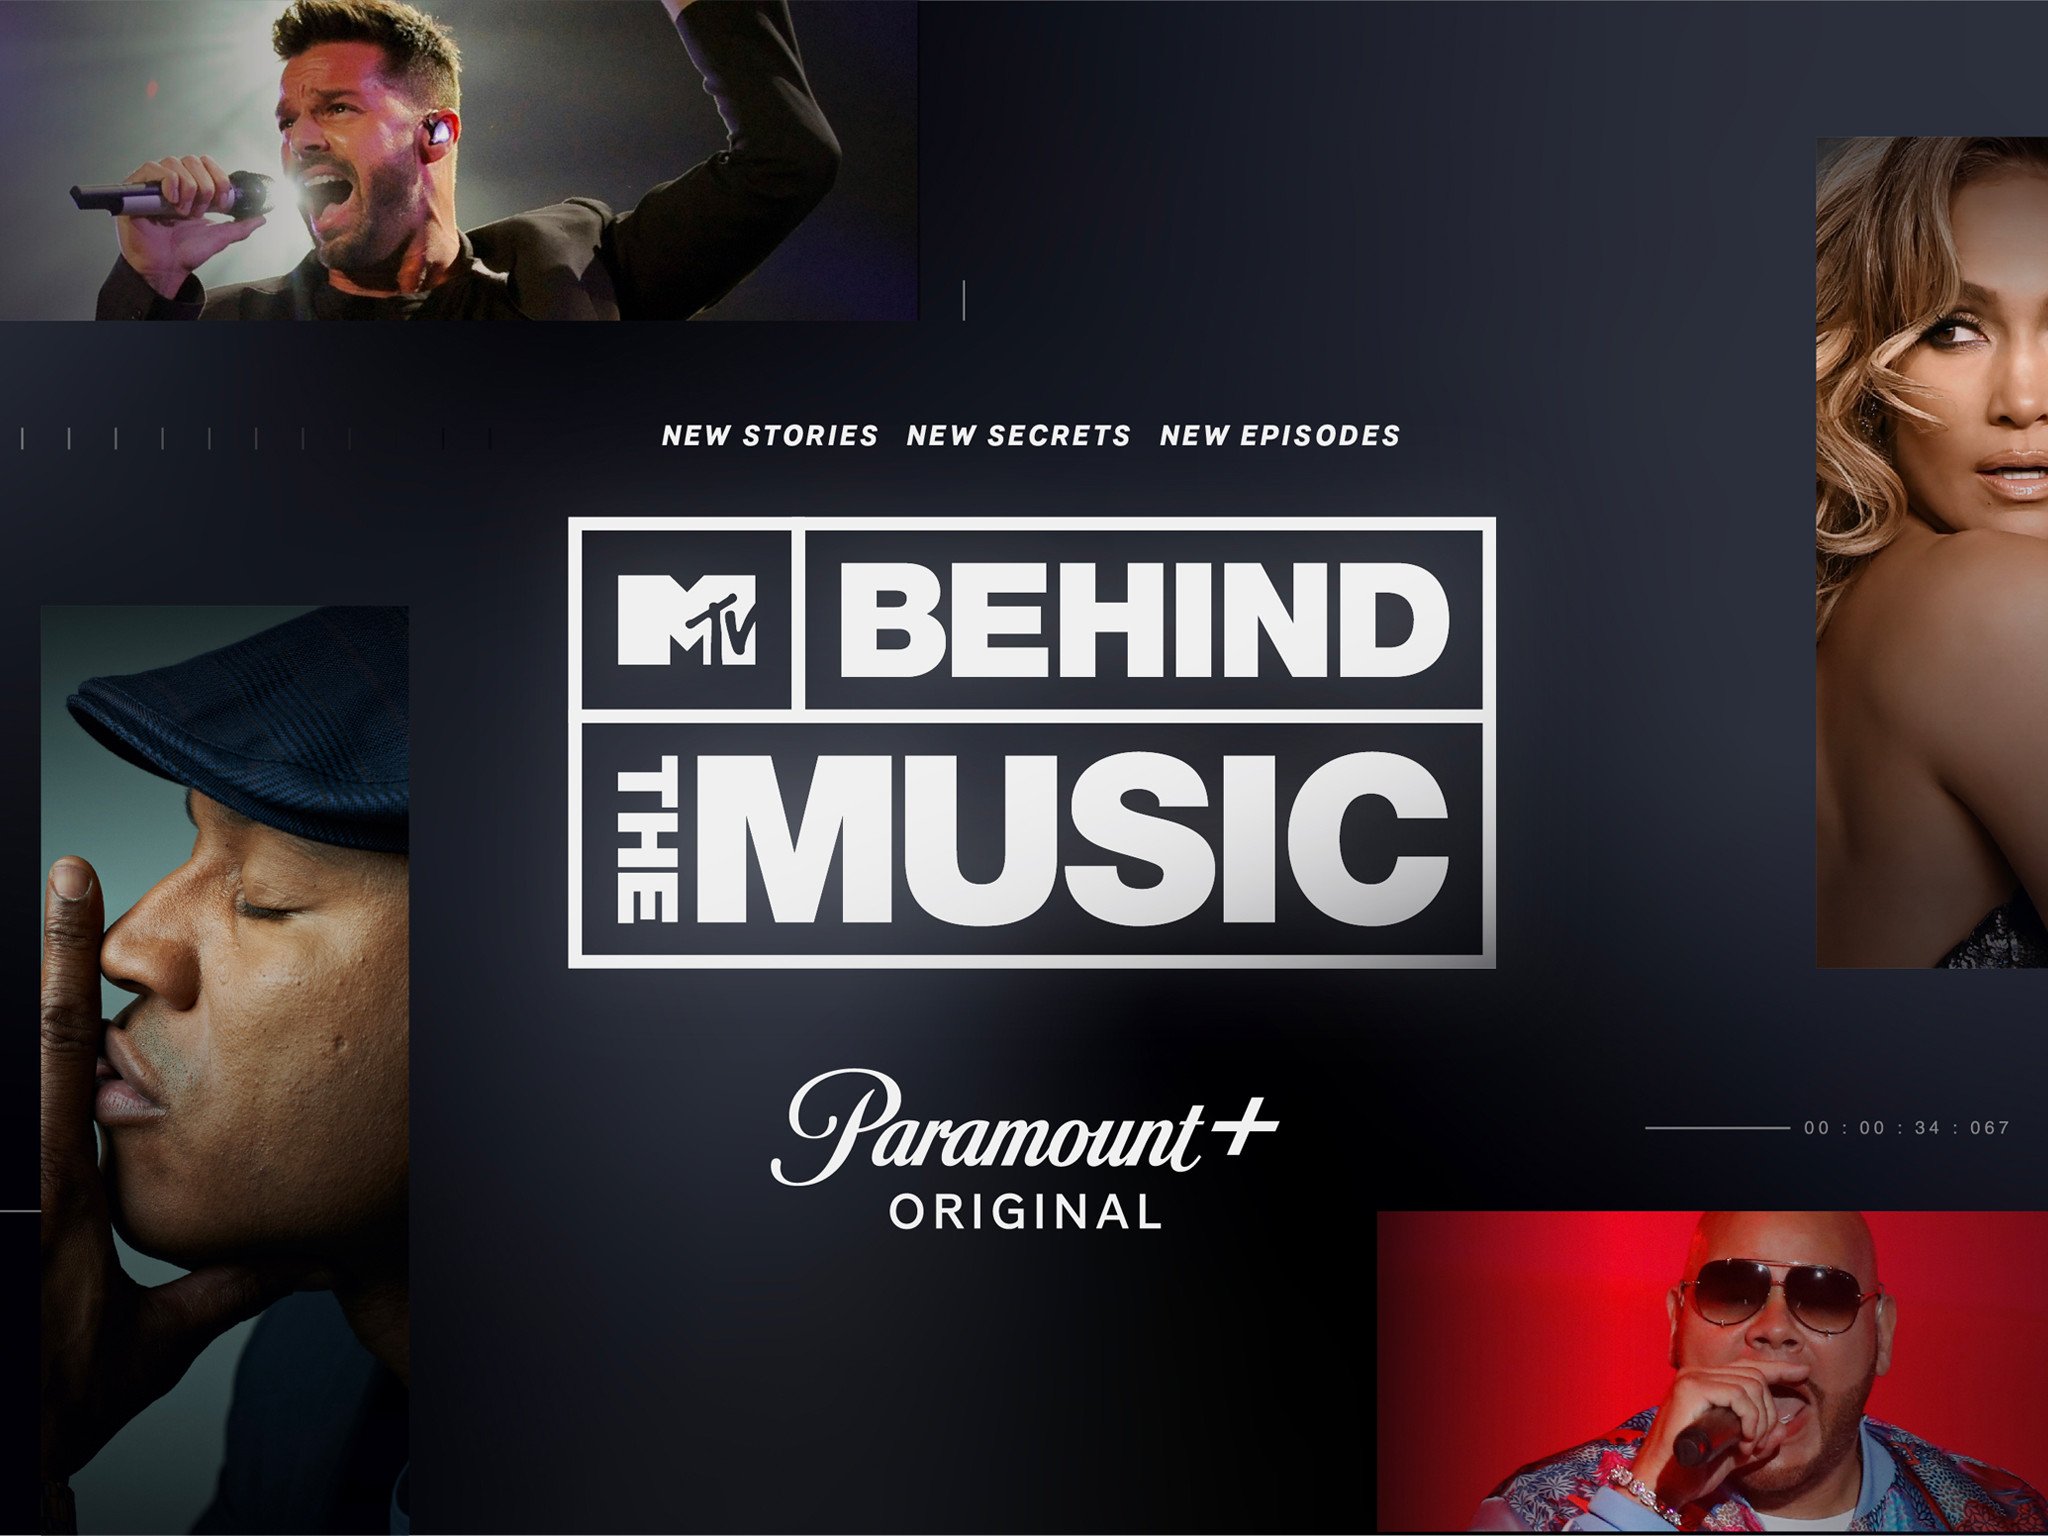 Behind the Music stream: How to watch the Paramount+ music docuseries online from anywhere